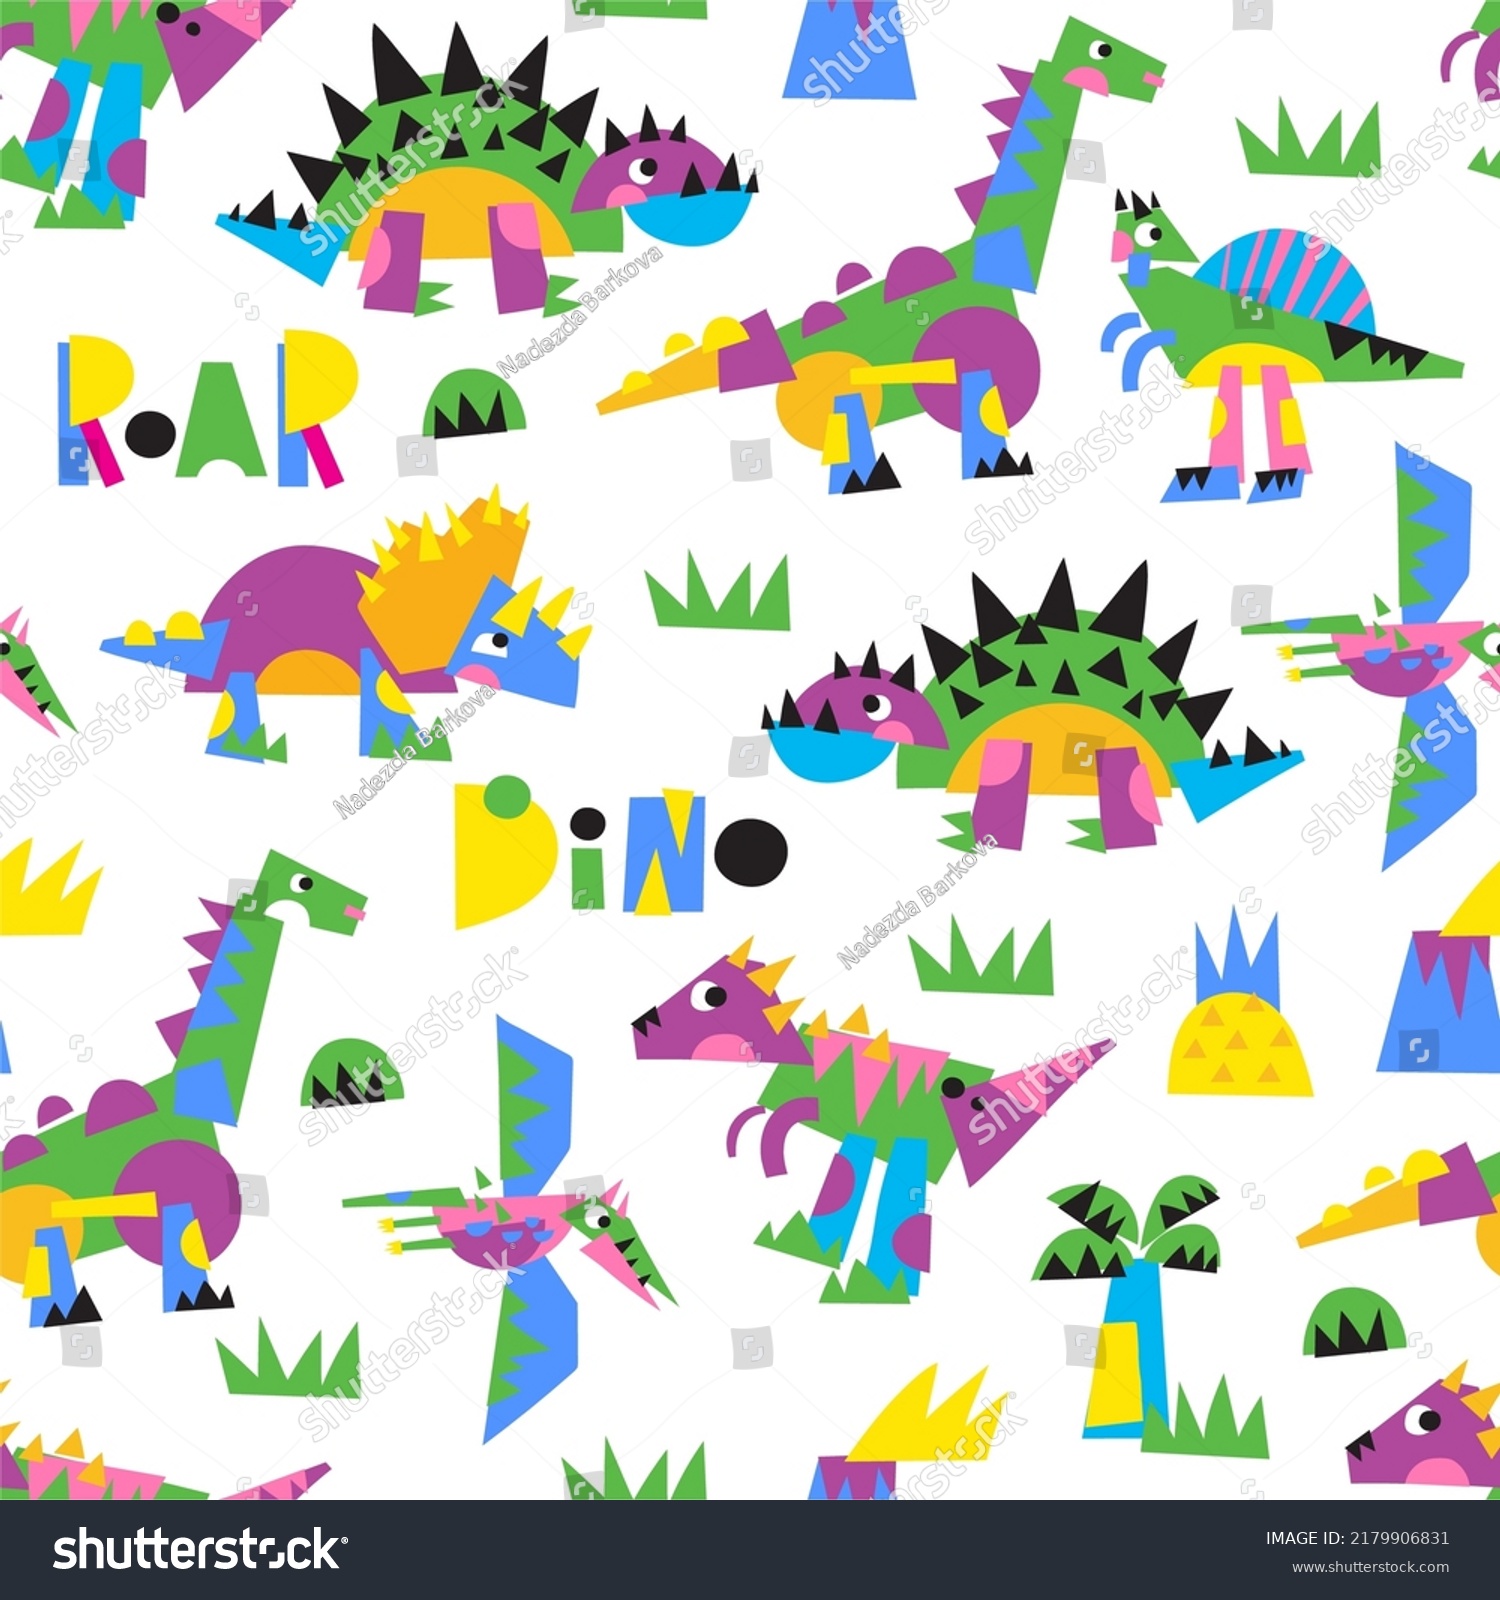 SVG of Fantastic cartoon Dino - vector print. dinosaur from abstract geometric shapes collage in modern style - seamless vector pattern svg